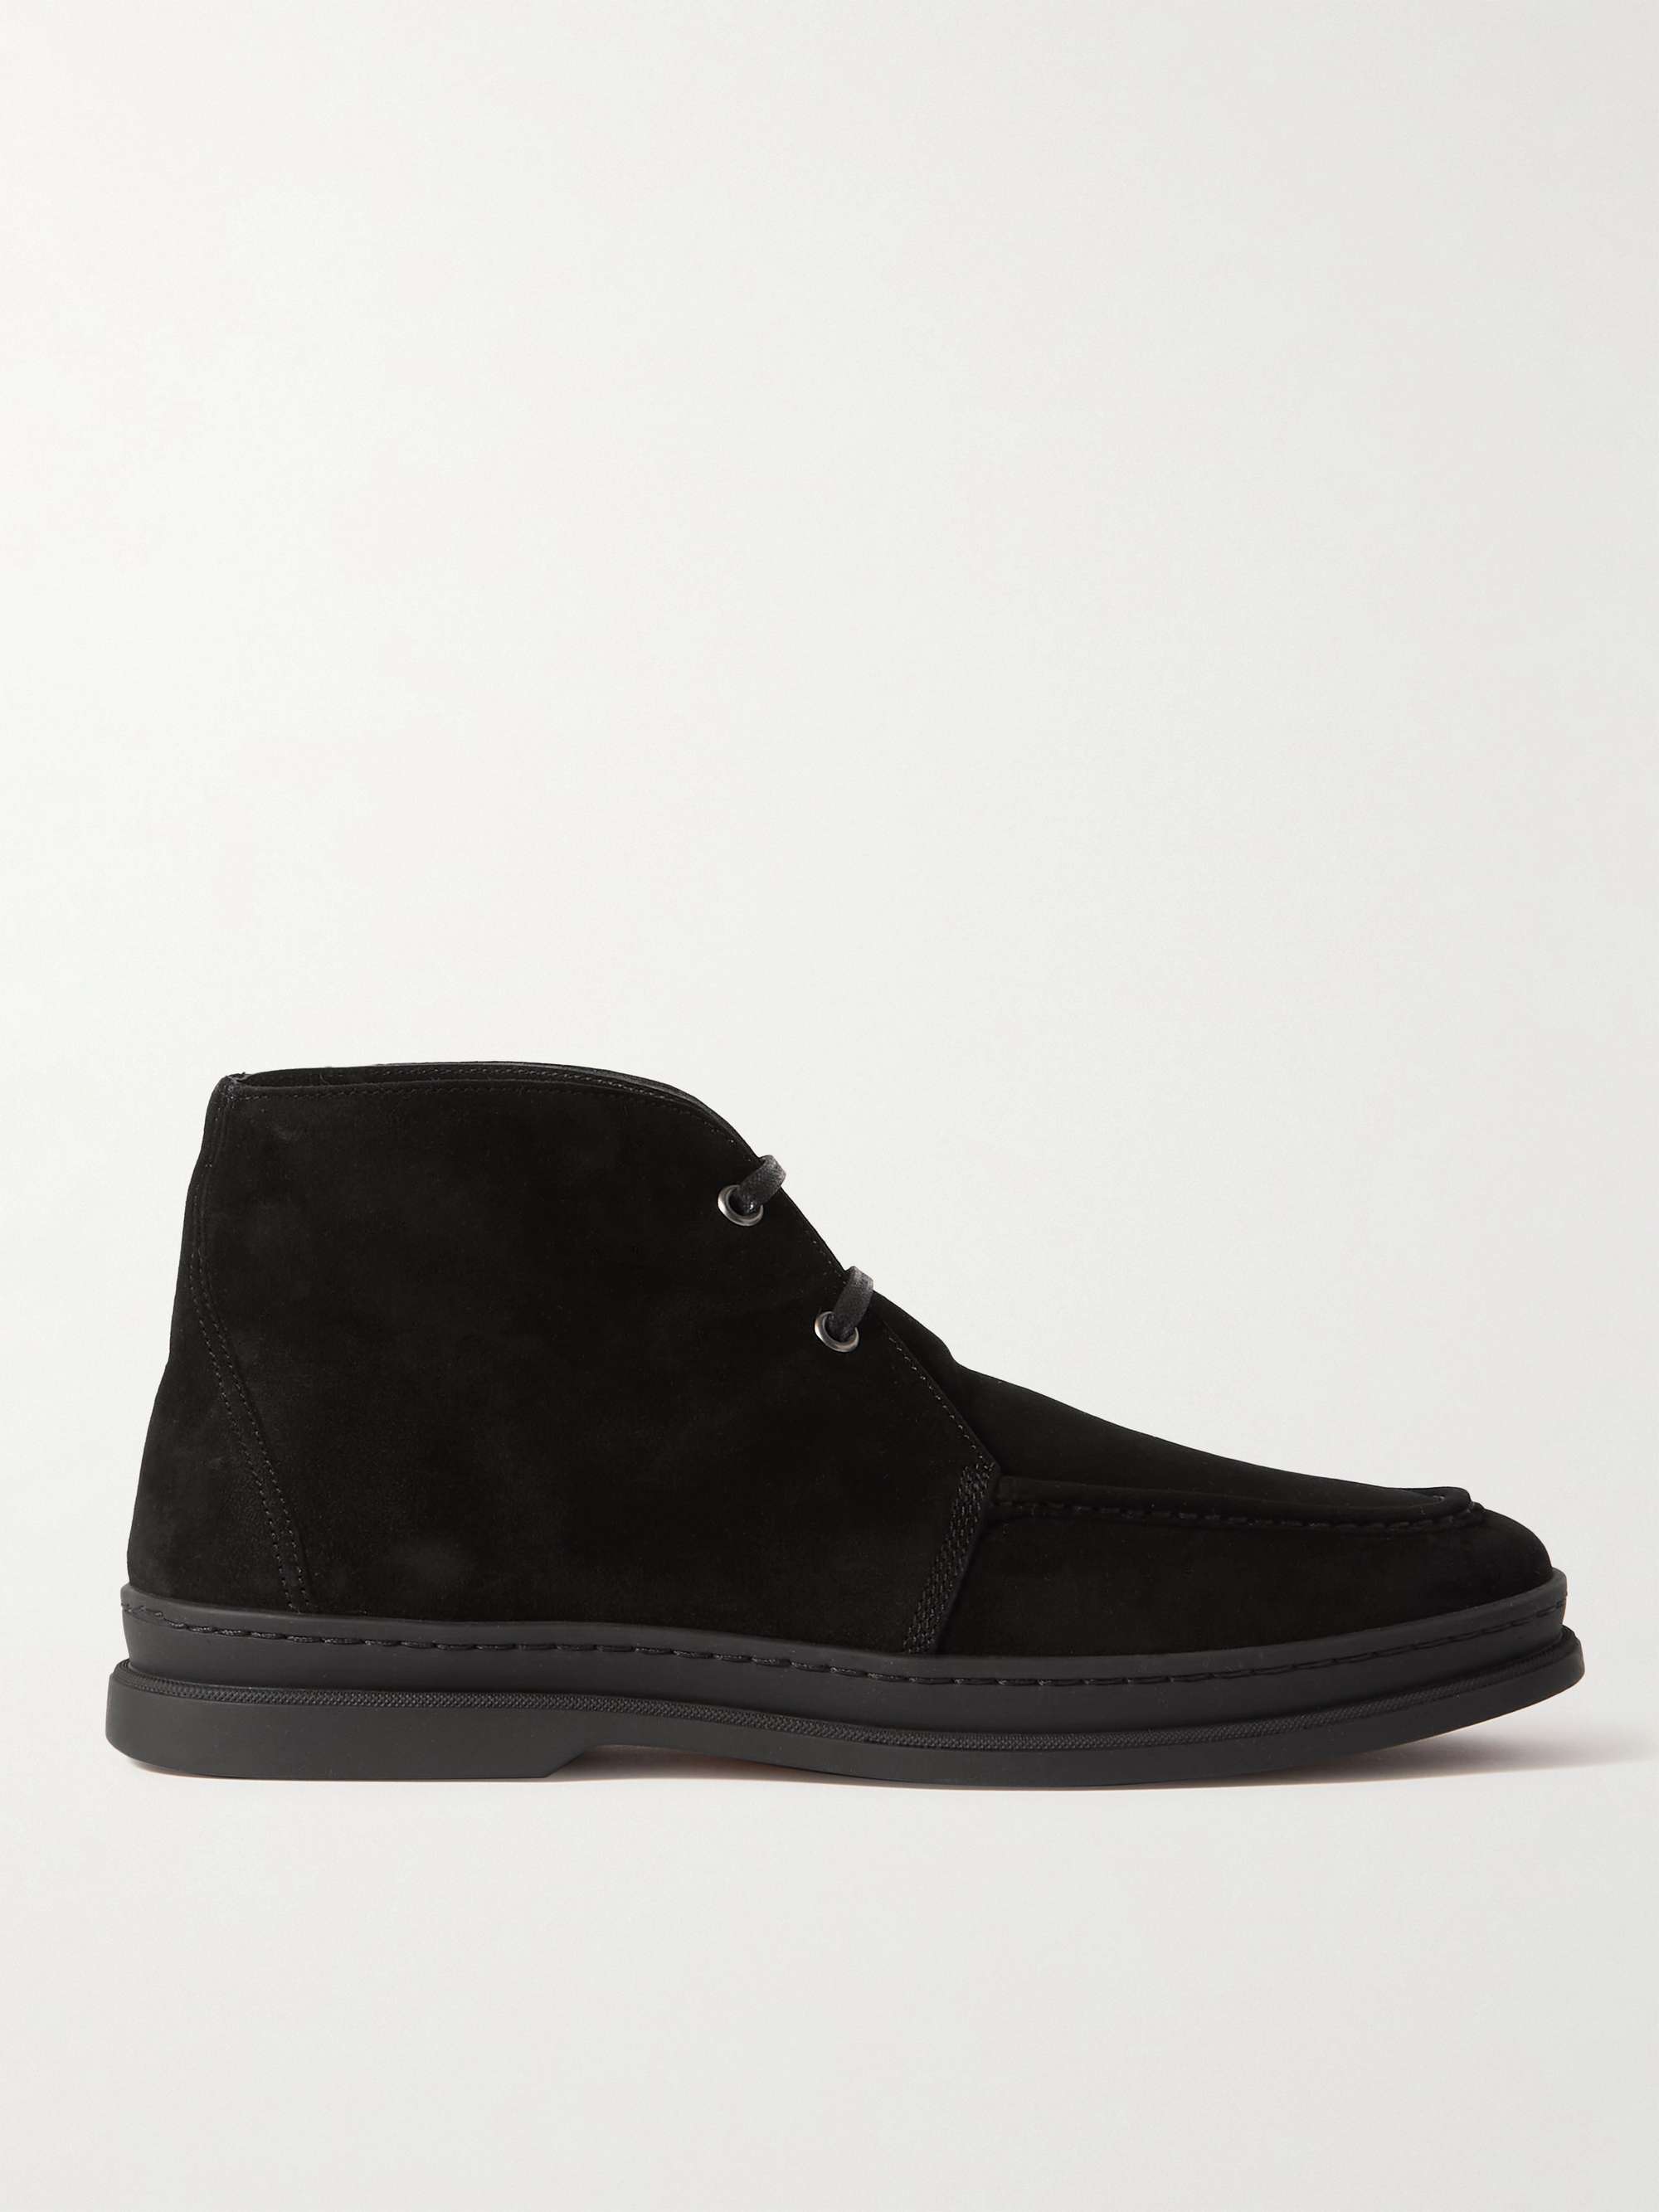 PAUL SMITH Paxton Suede Boots